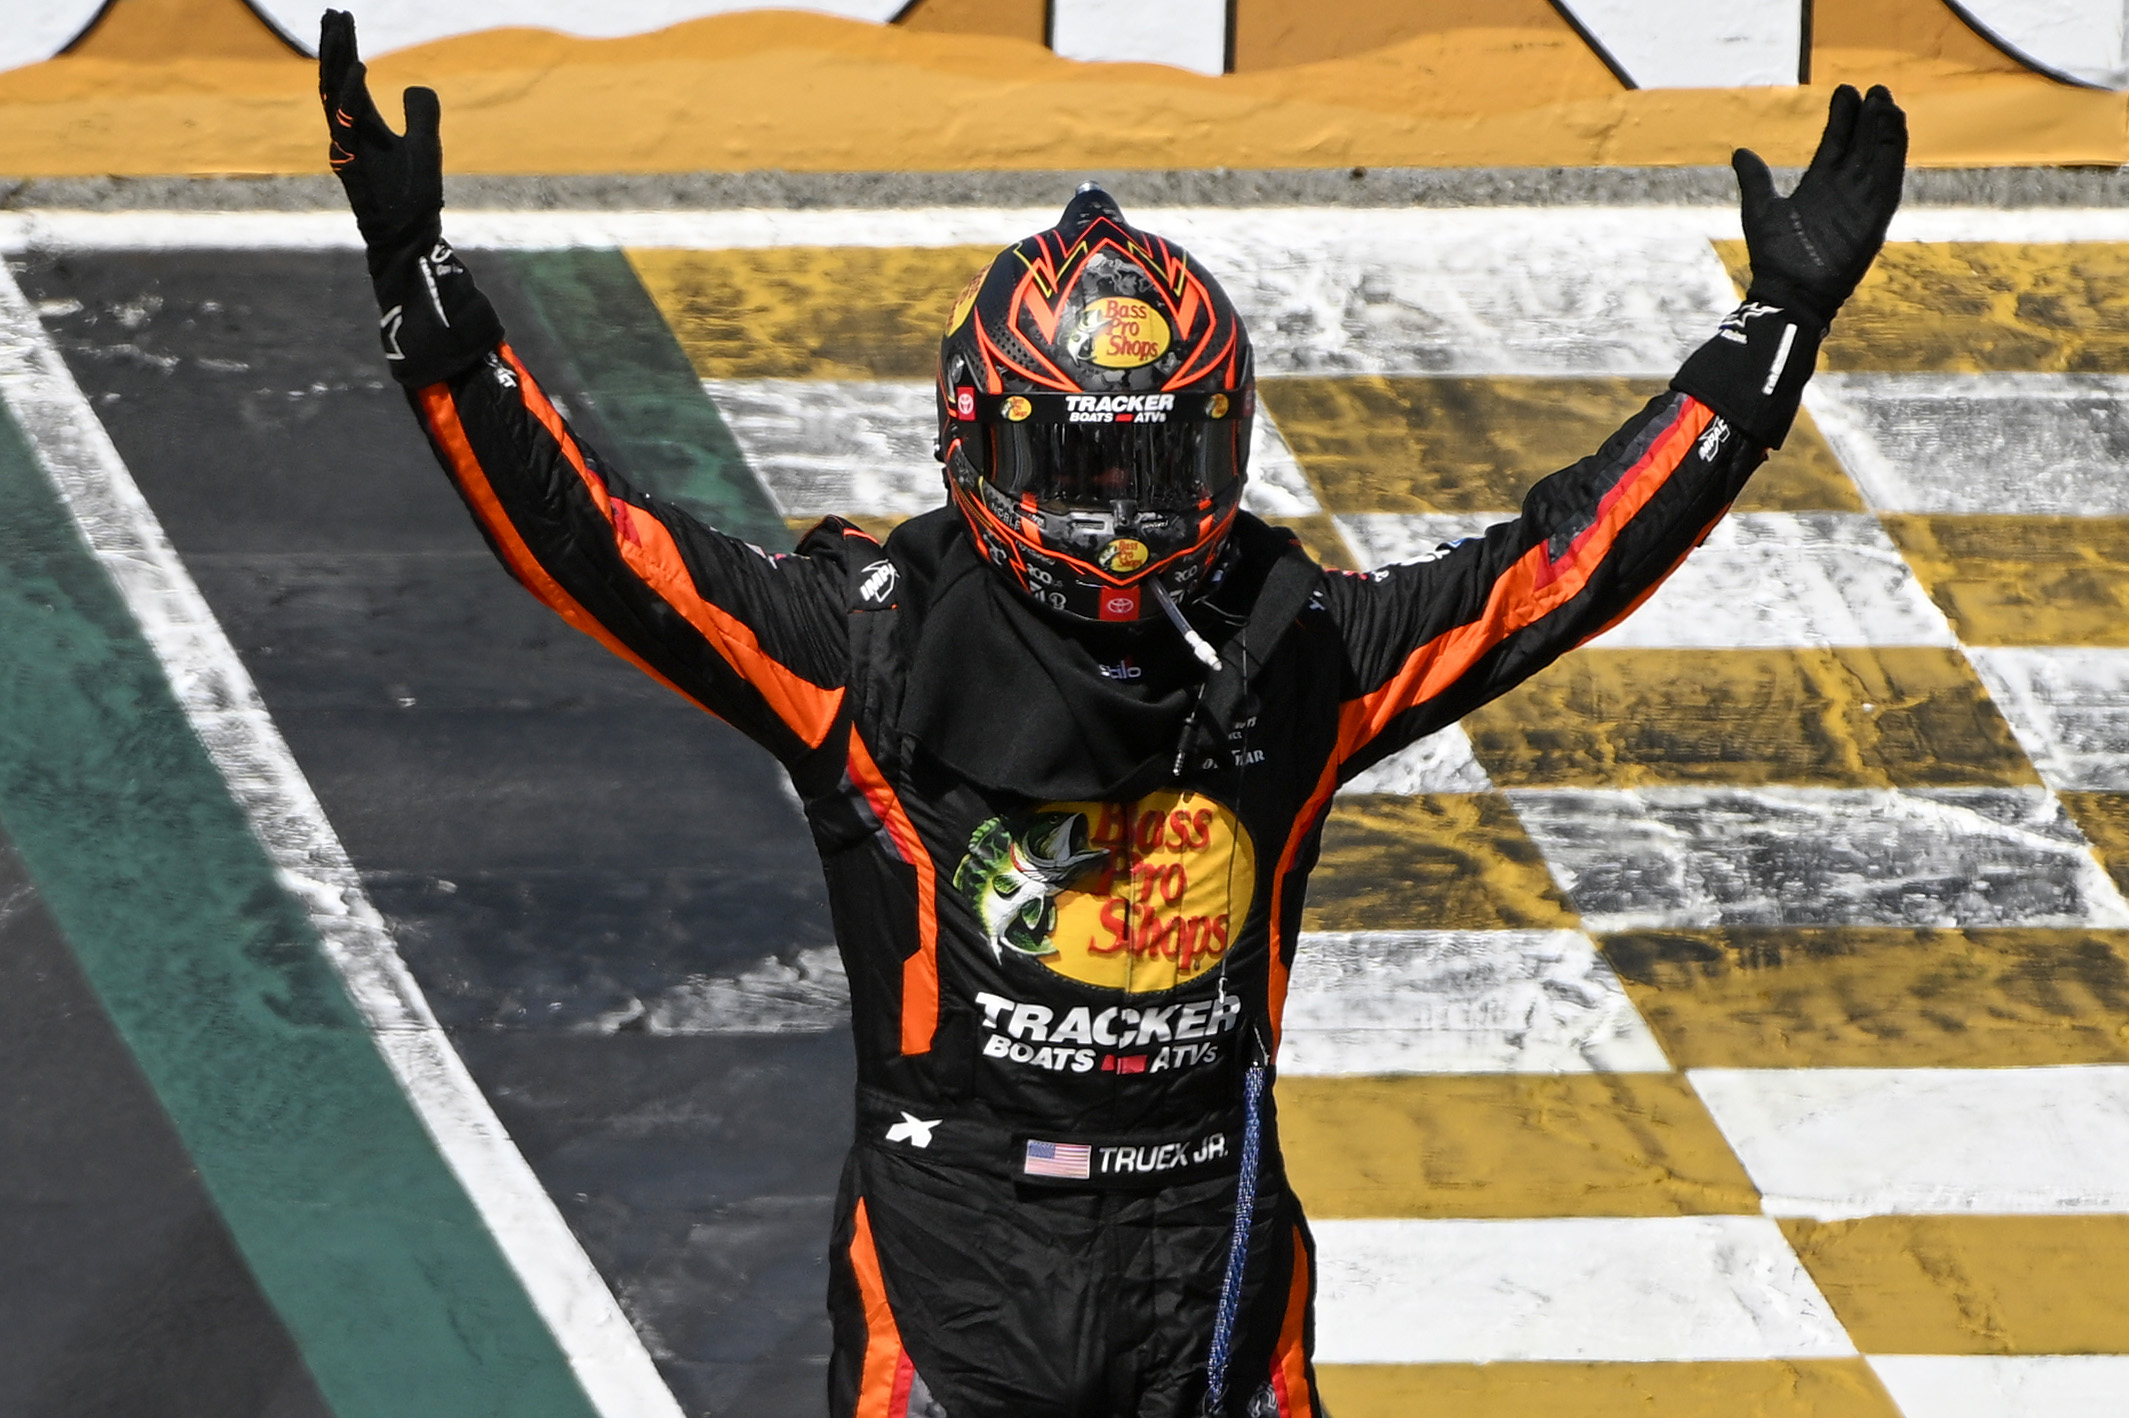 SONOMA, CALIFORNIA - JUNE 11: Martin Truex Jr., driver of the #19 Bass Pro Shops Toyota, celebrates after winning the NASCAR Cup Series Toyota / Save Mart 350 at Sonoma Raceway on June 11, 2023 in Sonoma, California. (Photo by Logan Riely/Getty Images)